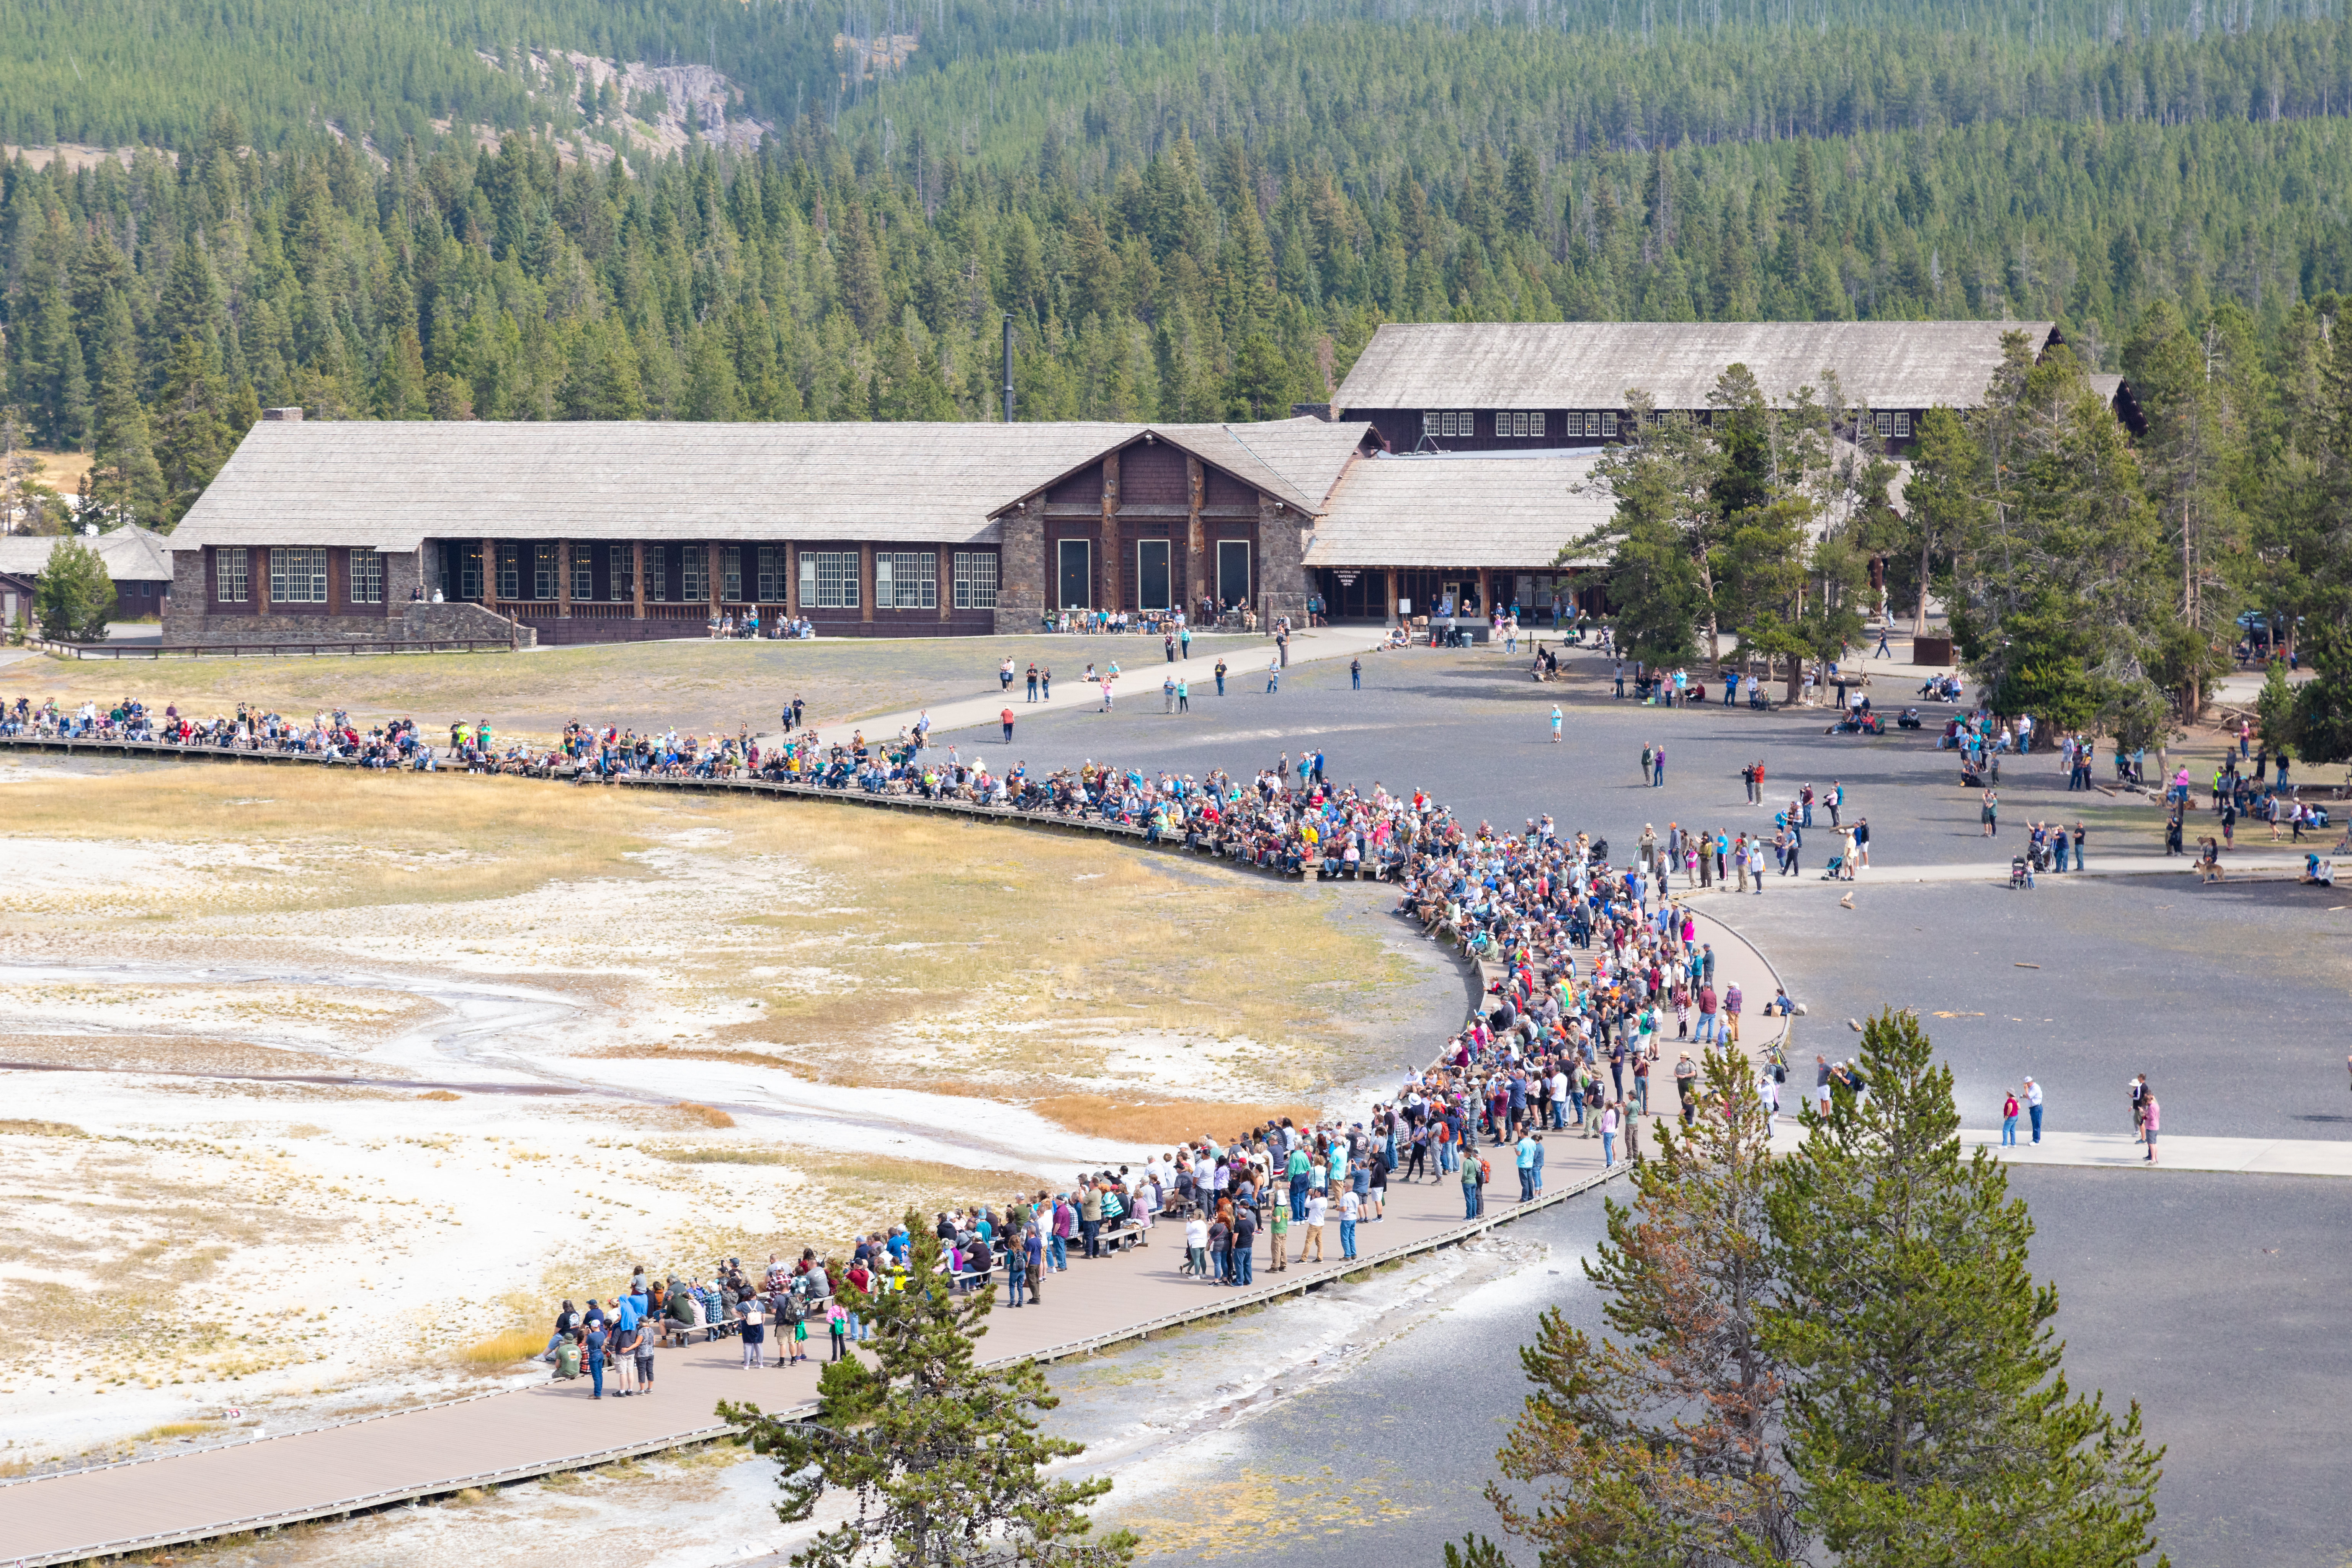 Crowds of people wait for an Old Faithful geyser eruption